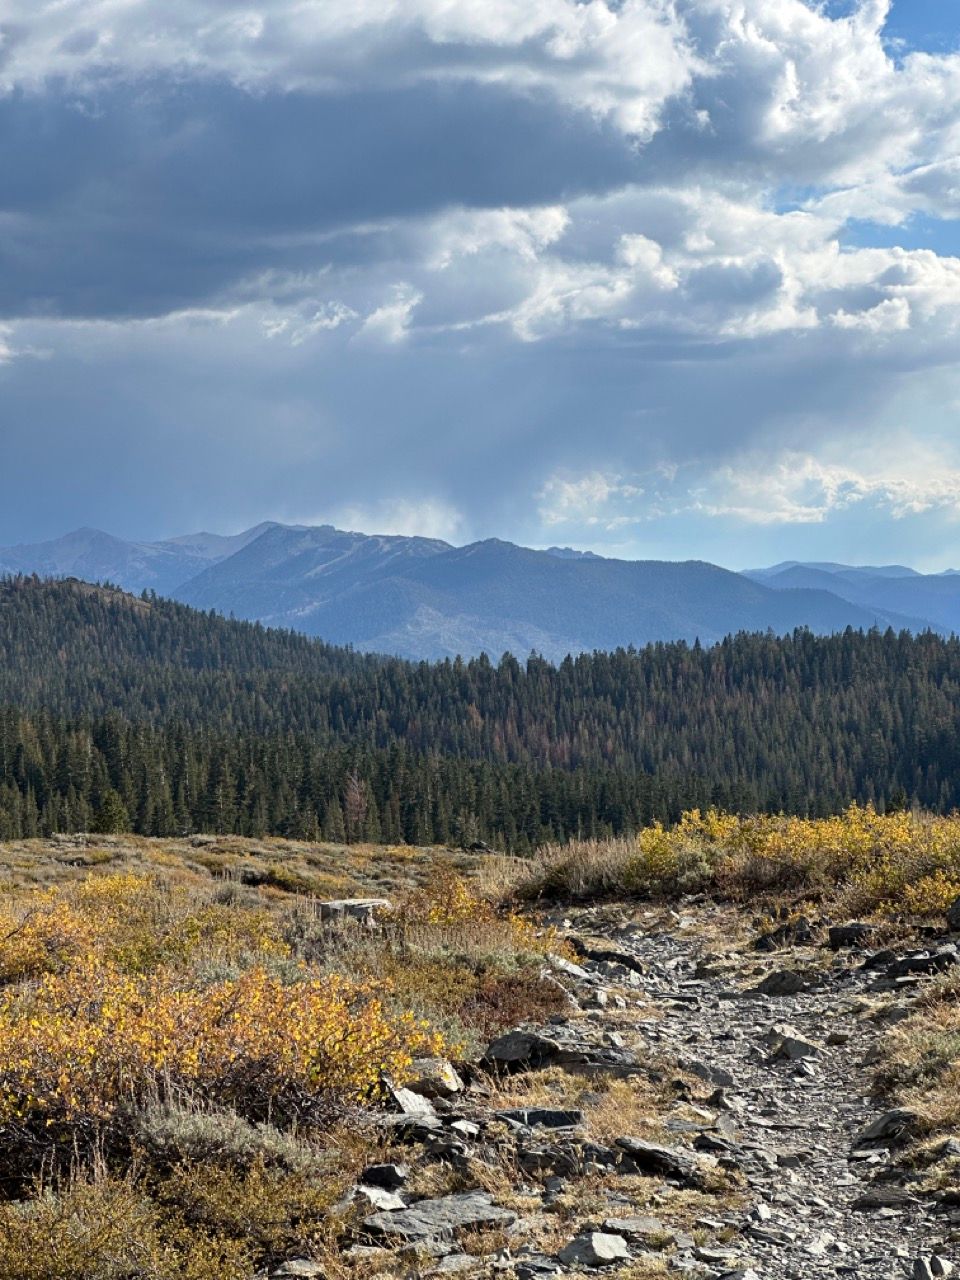 How to bikepack the Tahoe Rim Trail in 3 days